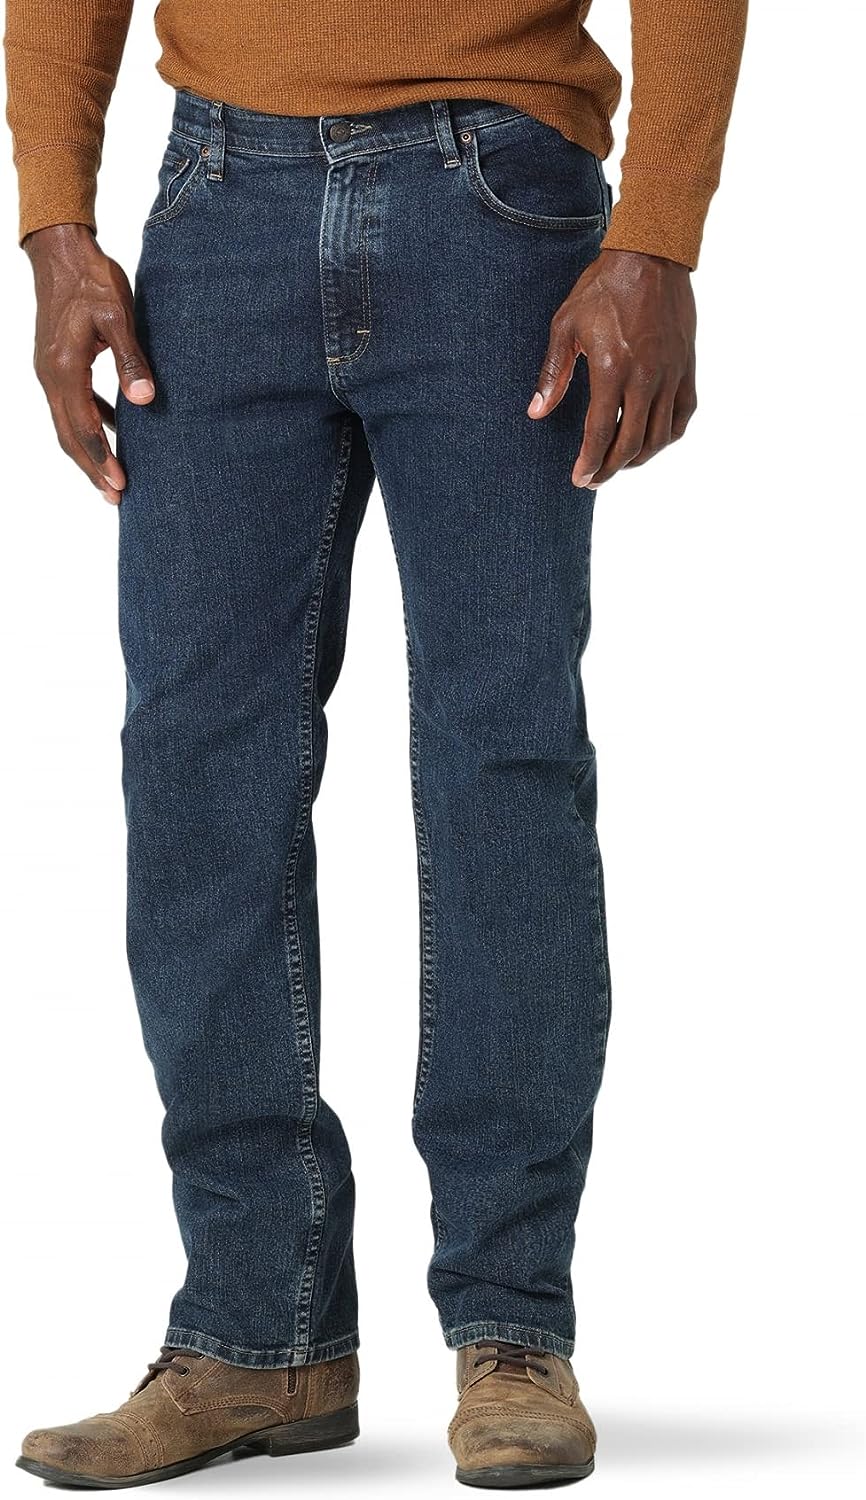 mens work jeans detailed review